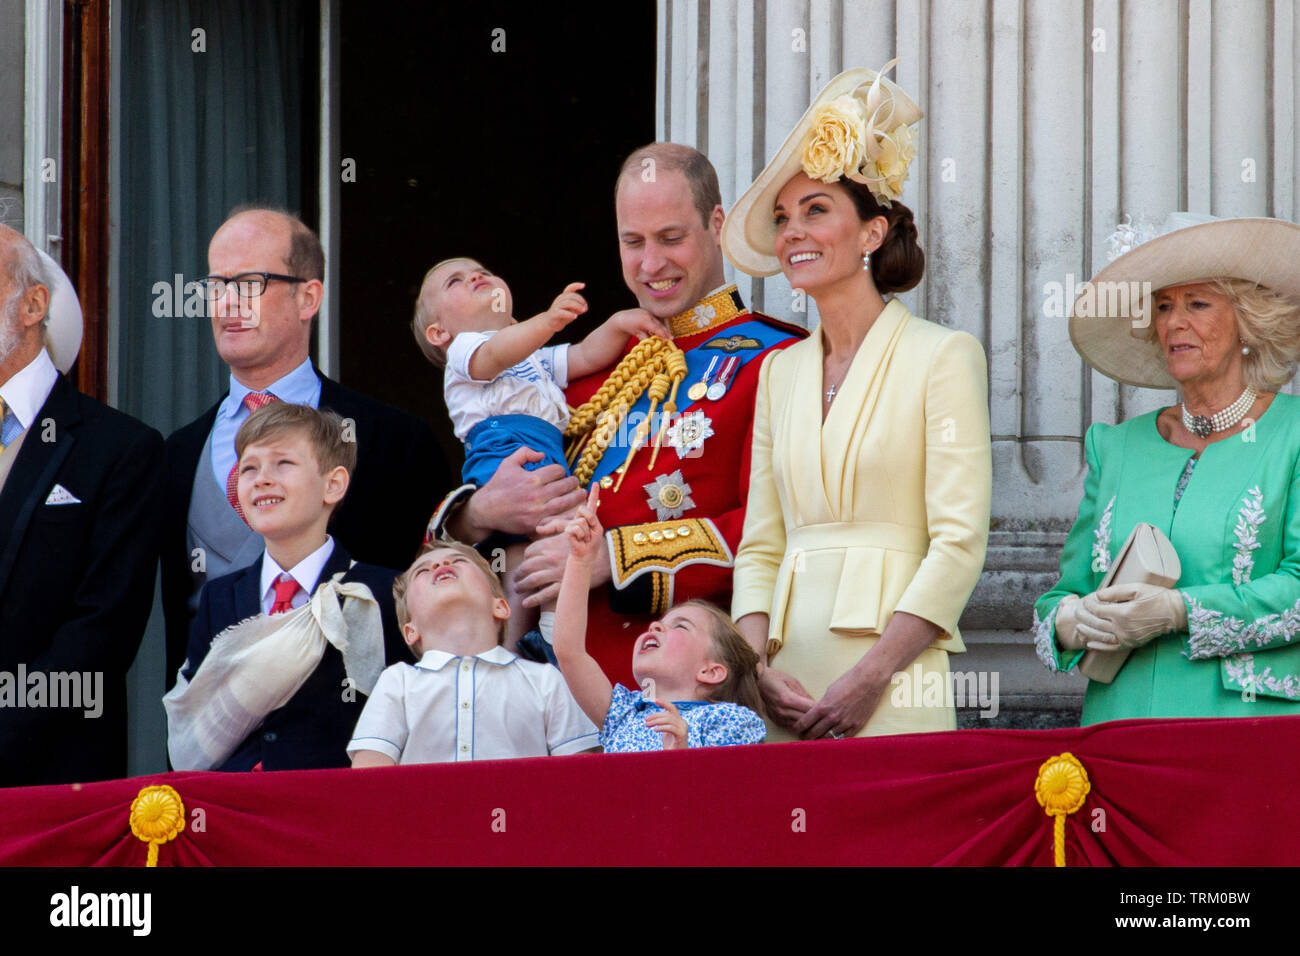 Picture dated June 8th shows Prince William, Catherine Duchess of Cambridge, Prince Louis, Prince George and Princess Charlotte at the Trooping the Colour in London today.   The Queen's official birthday has been marked with the annual Trooping the Colour parade. She was joined by members of her family and thousands of spectators to watch the display in Horse Guards Parade in Whitehall. The Prince of Wales, the Duchess of Cornwall, the Duke and Duchess of Cambridge and the Duke and Duchess of Sussex all attended. The Queen celebrated her 93rd birthday in April. The royal colonels - the Prince Stock Photo